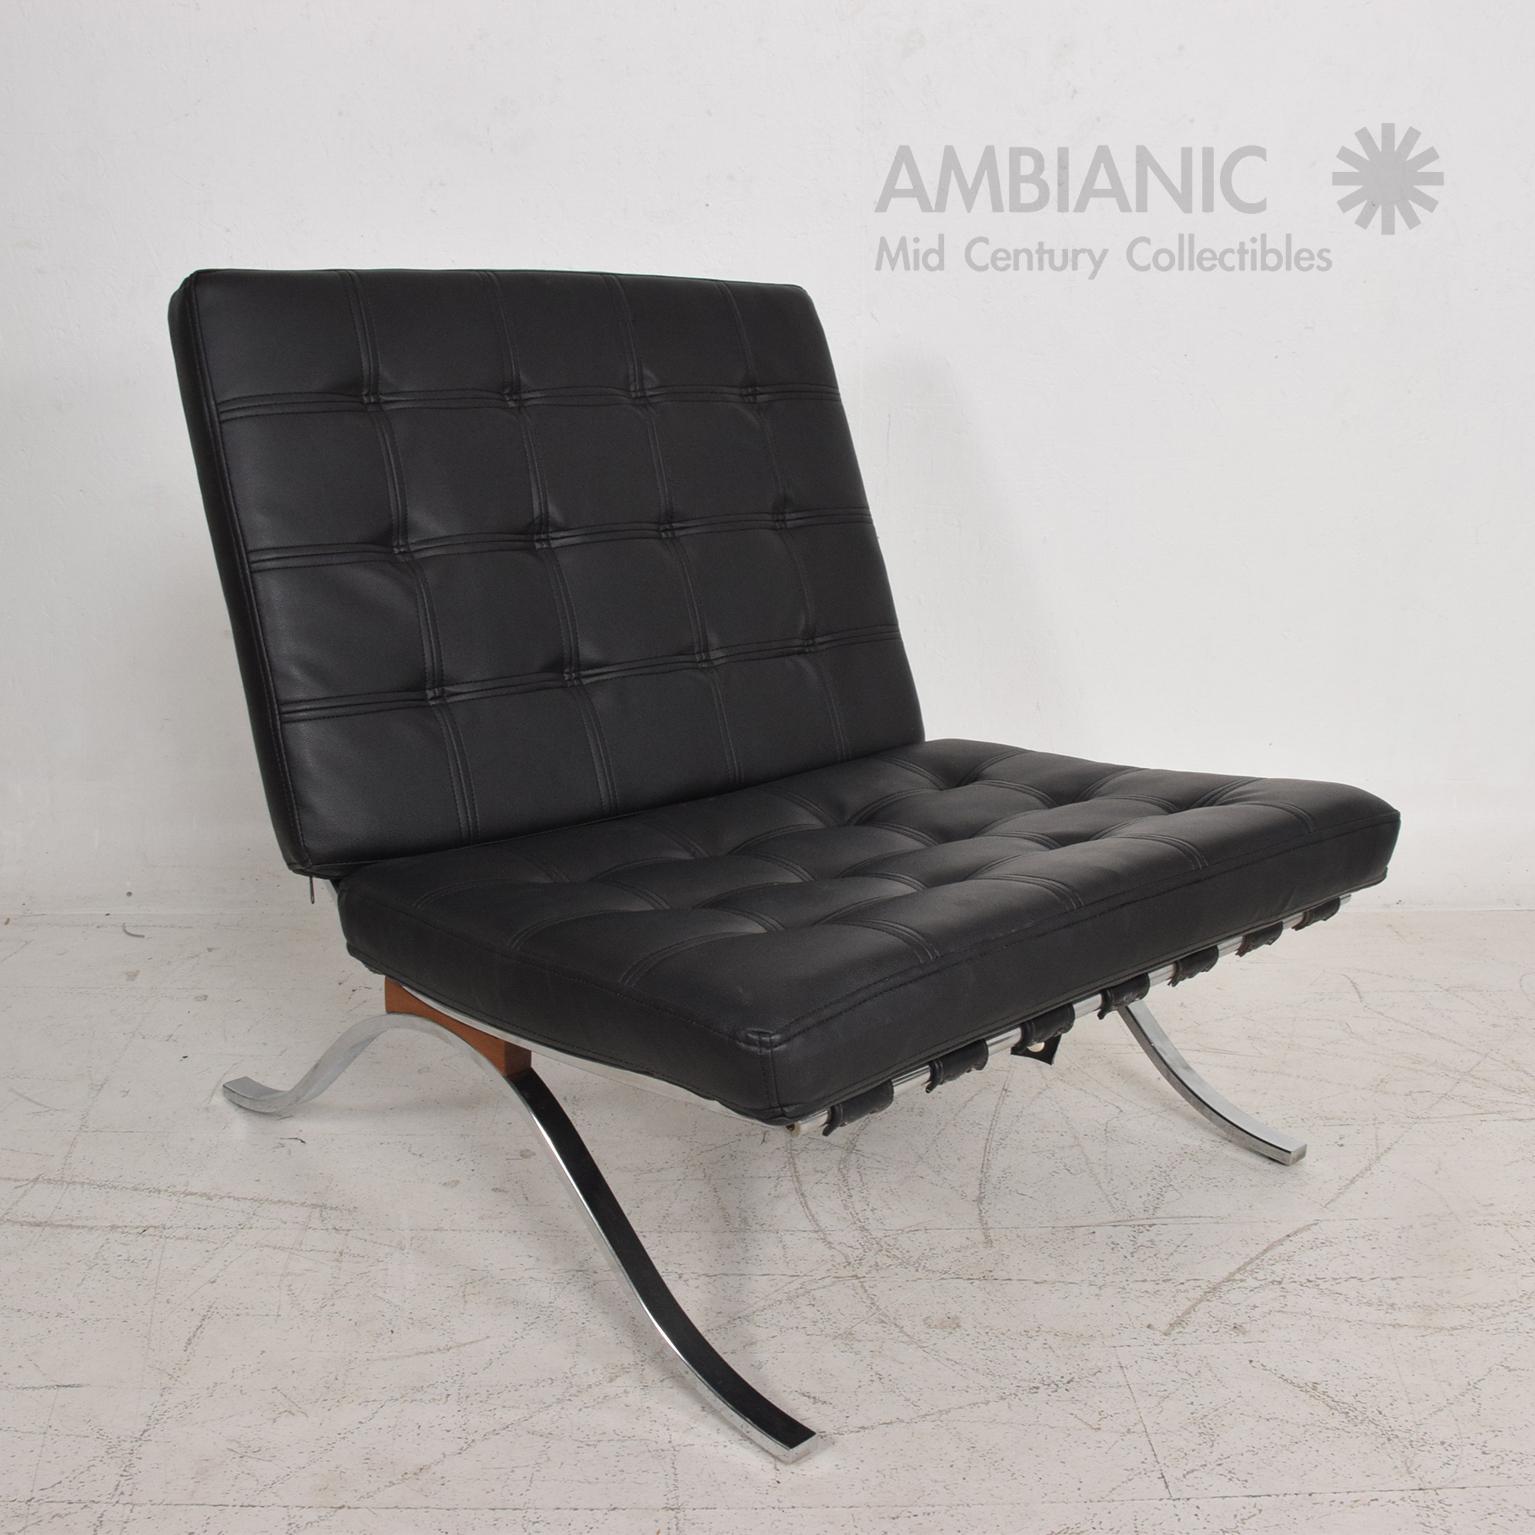 For your consideration: a vintage Lounge Chair in the Barcelona Tugendhat style designed in 1929 by Ludwig Mies van der Rohe. Offering this Mid Century Modern Classic design circa1960s done by SELIG.

Chrome-plated frame with Rosewood details